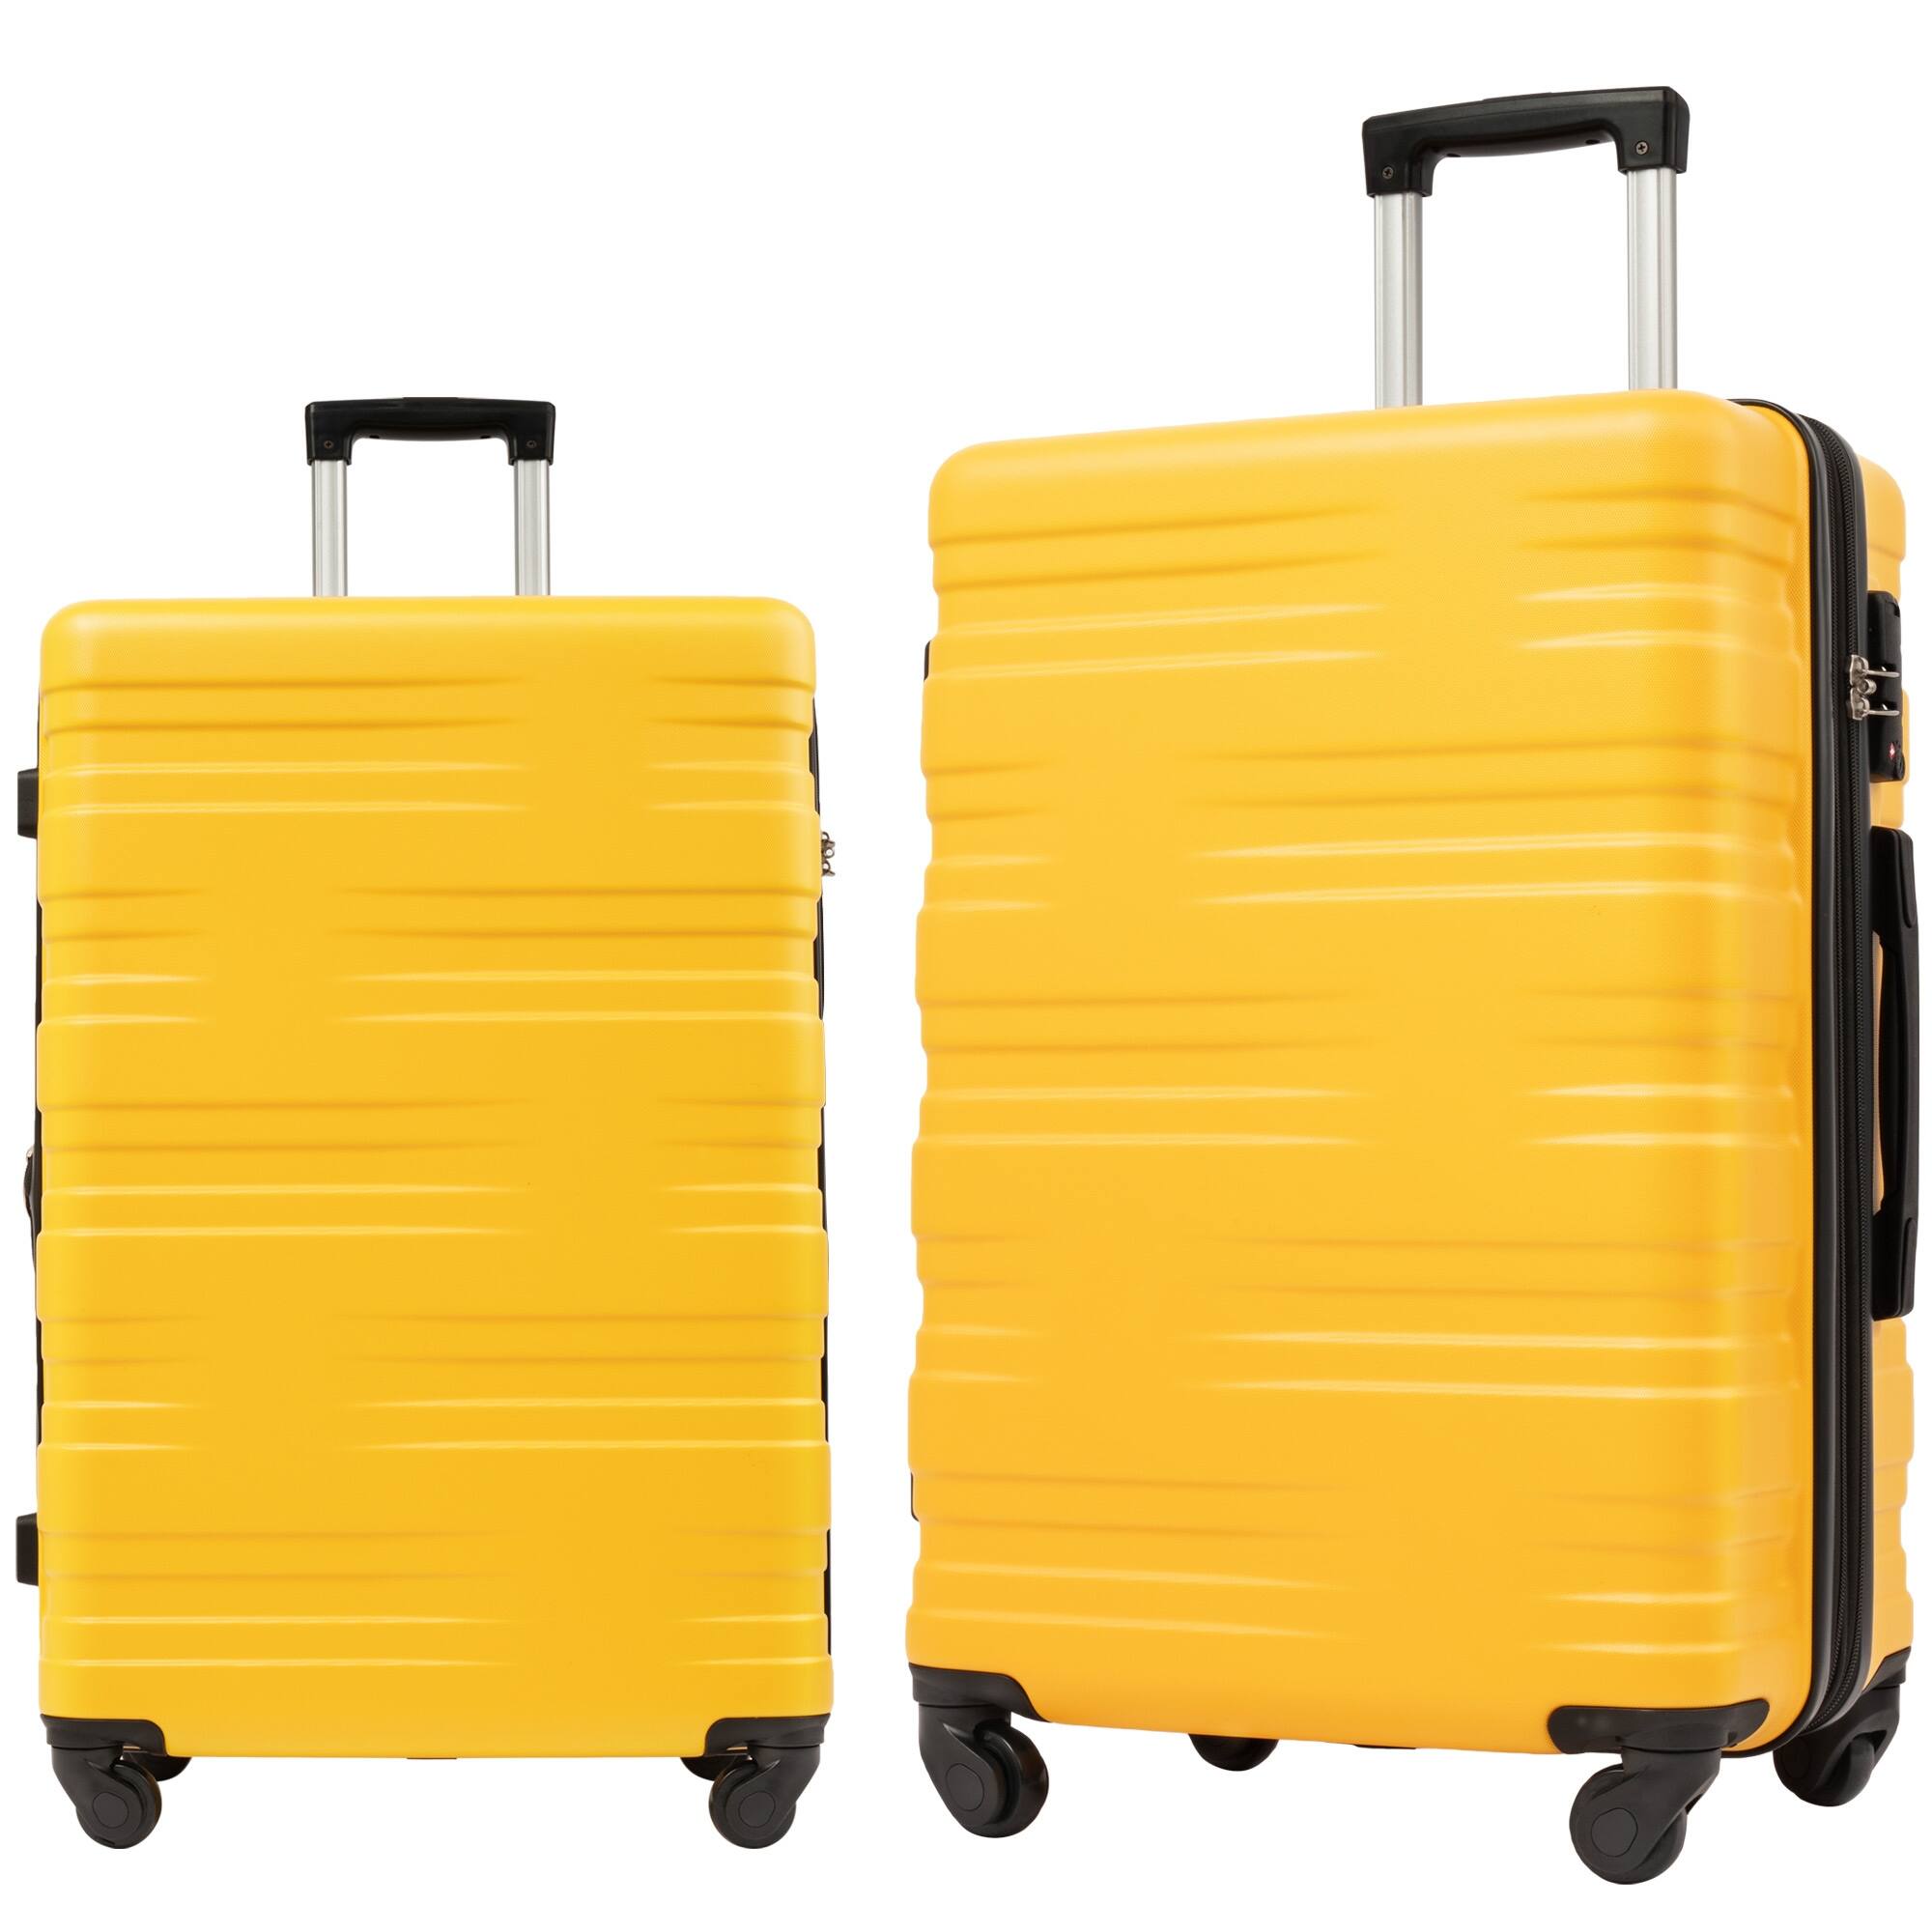 2 Piece Carry on Luggage Airline Approved Hard Case Trunk Sets, Yellow ...